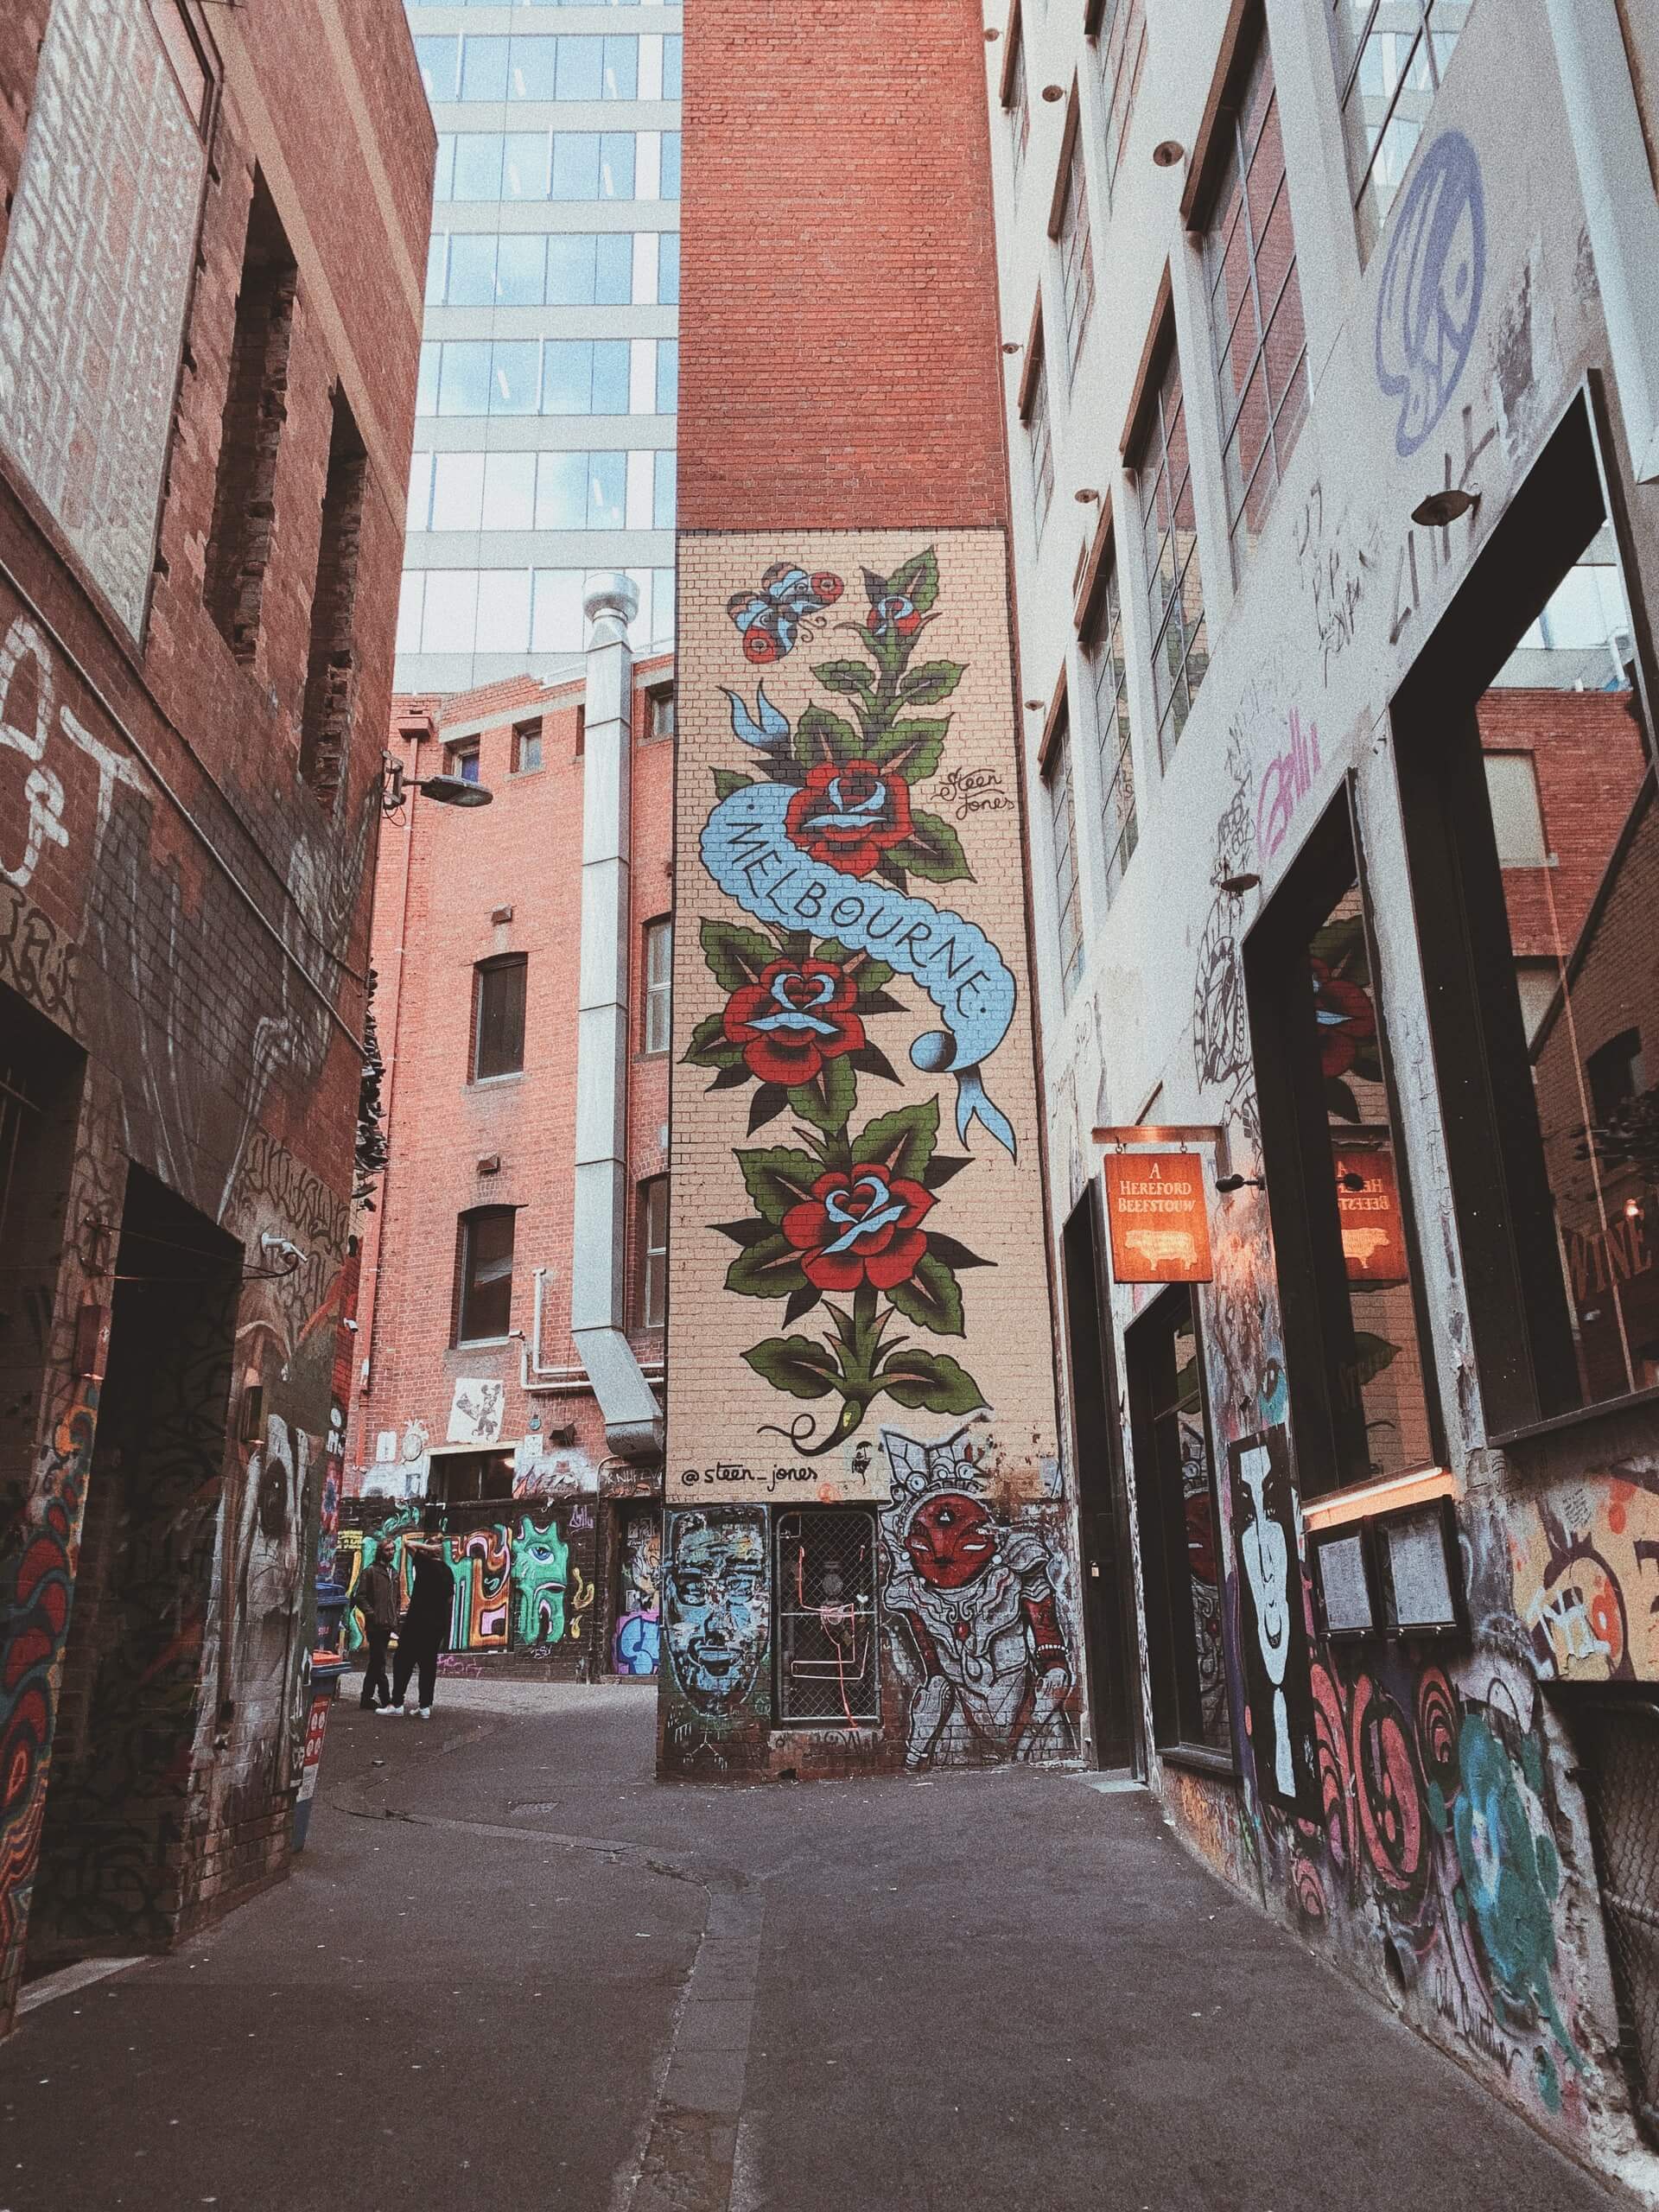 A photo of the famous laneways in Melbourne.